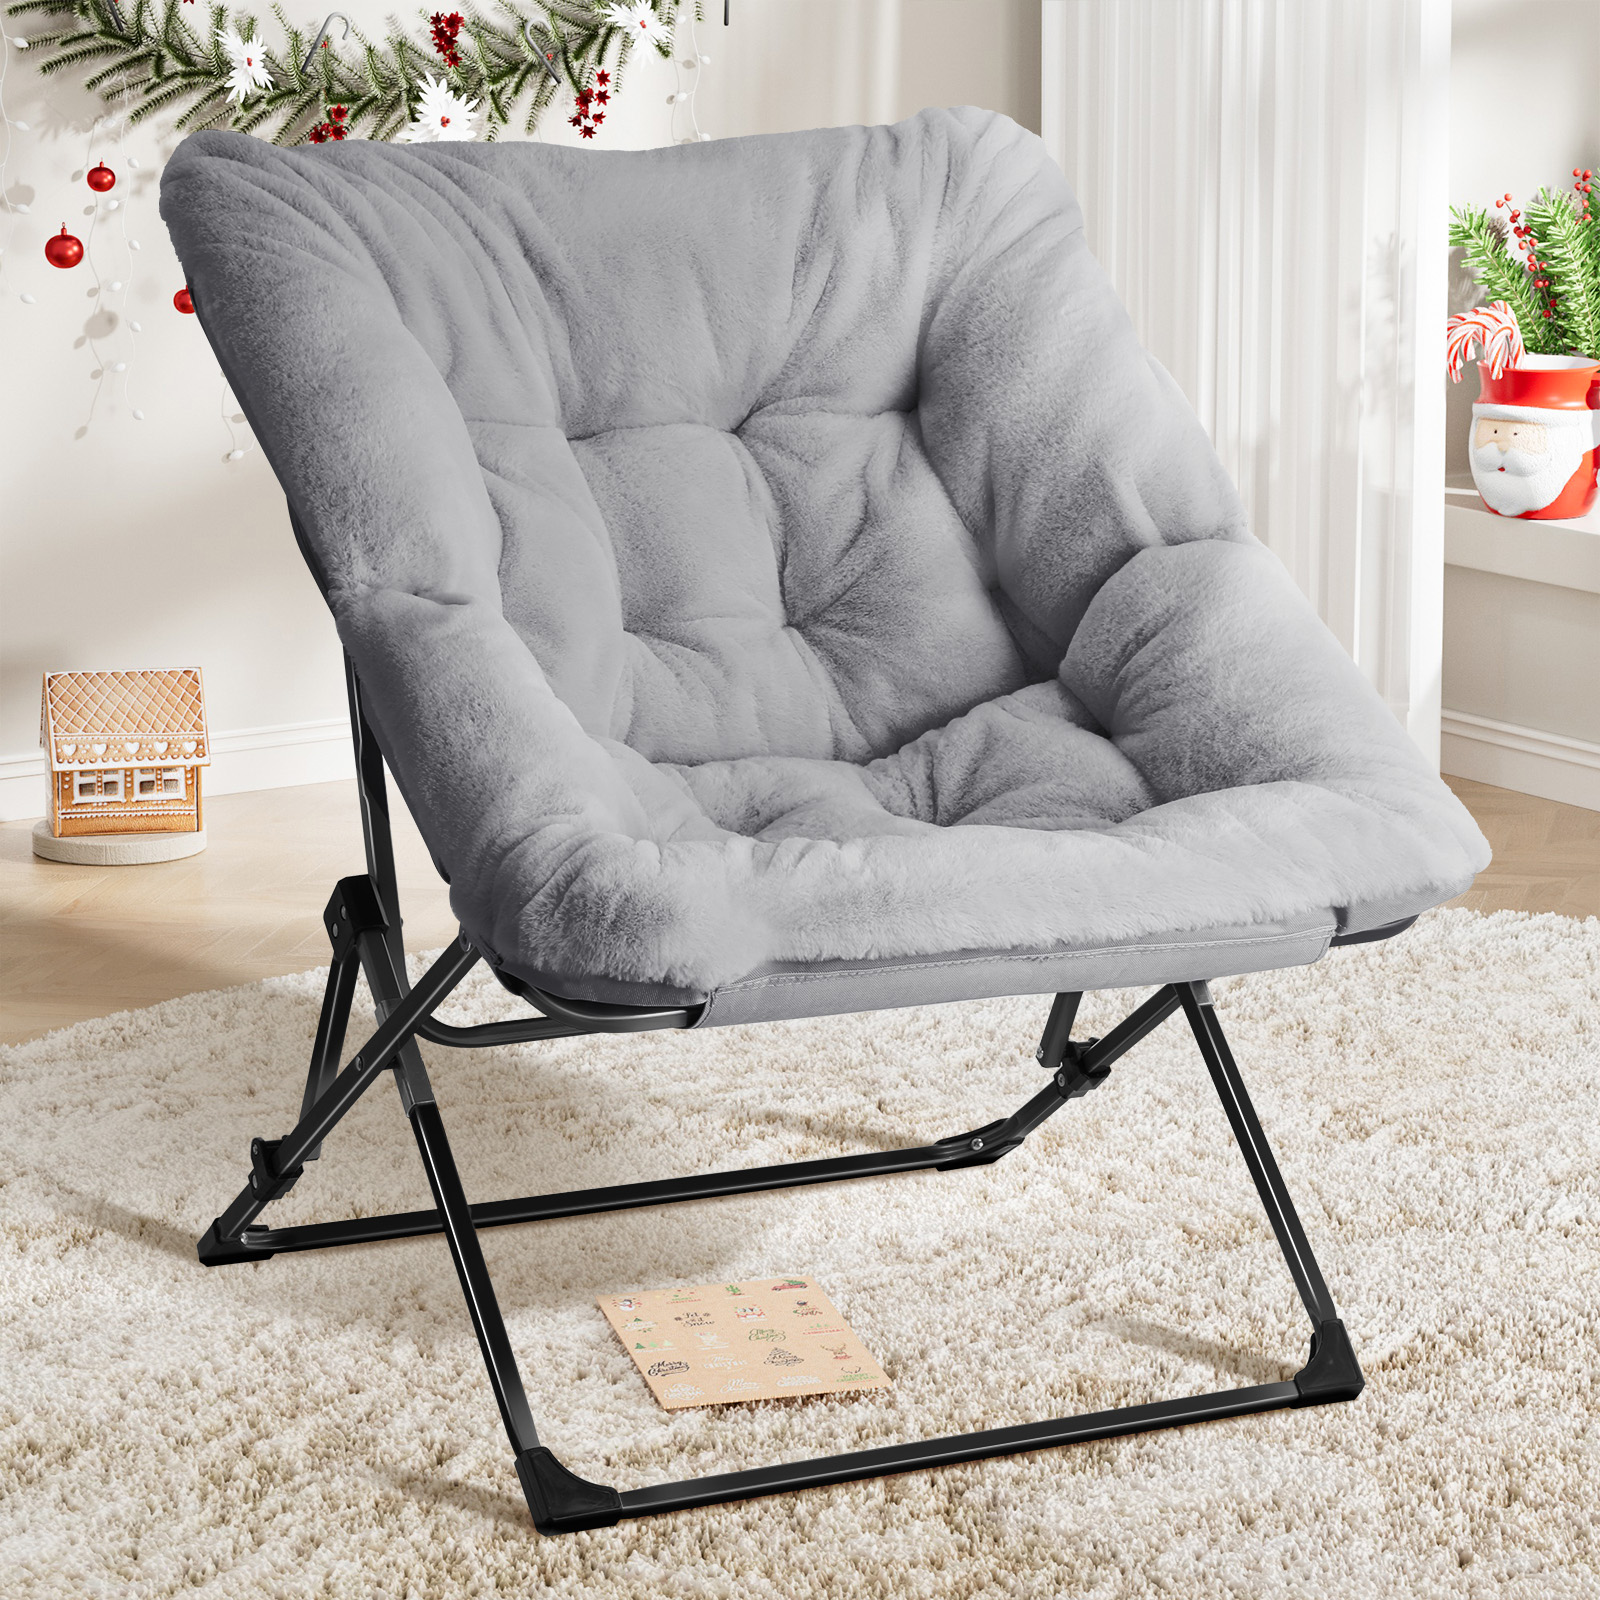 GIKPAL Saucer Chair, Comfy Bedroom Chairs, Oversized Folding Faux Fur Chair for Living Room, Balcony and Study, Flexible Seating Chair for Kids Teens Adults, Grey - image 1 of 8